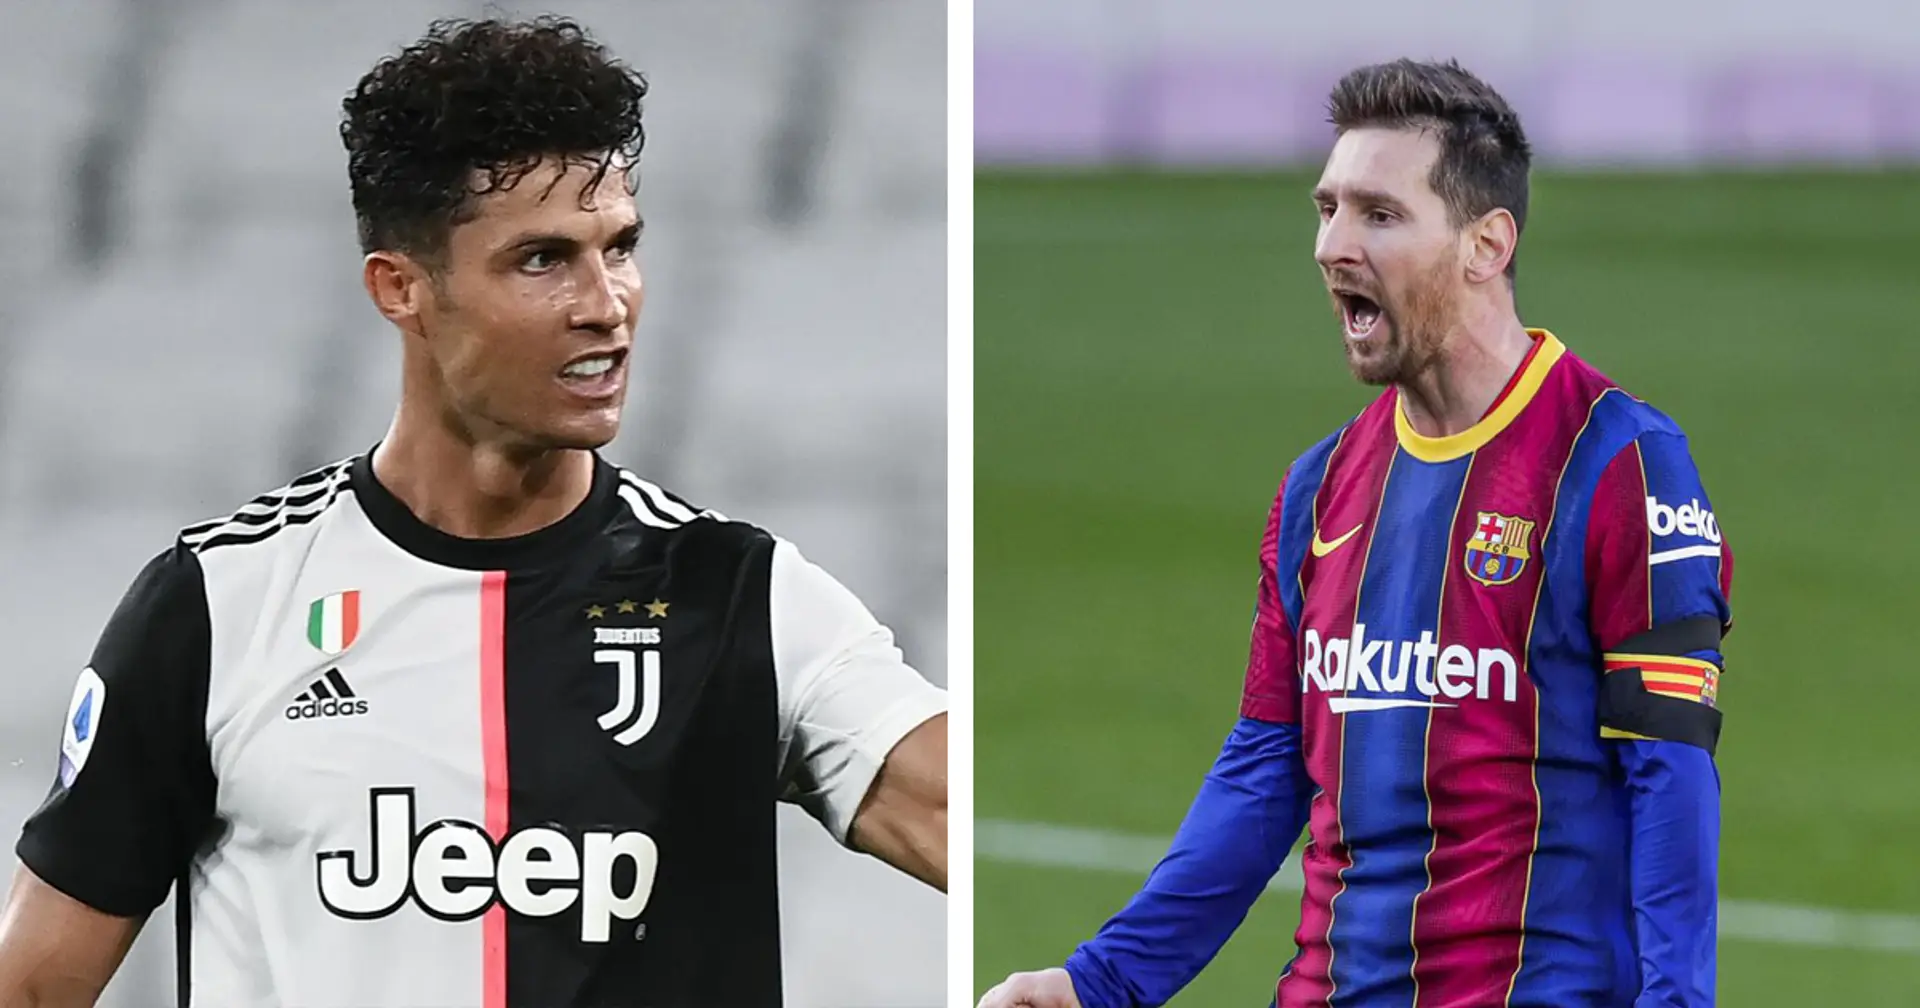 2 stats show there's no end in sight for Messi-Ronaldo rivalry even from different Leagues